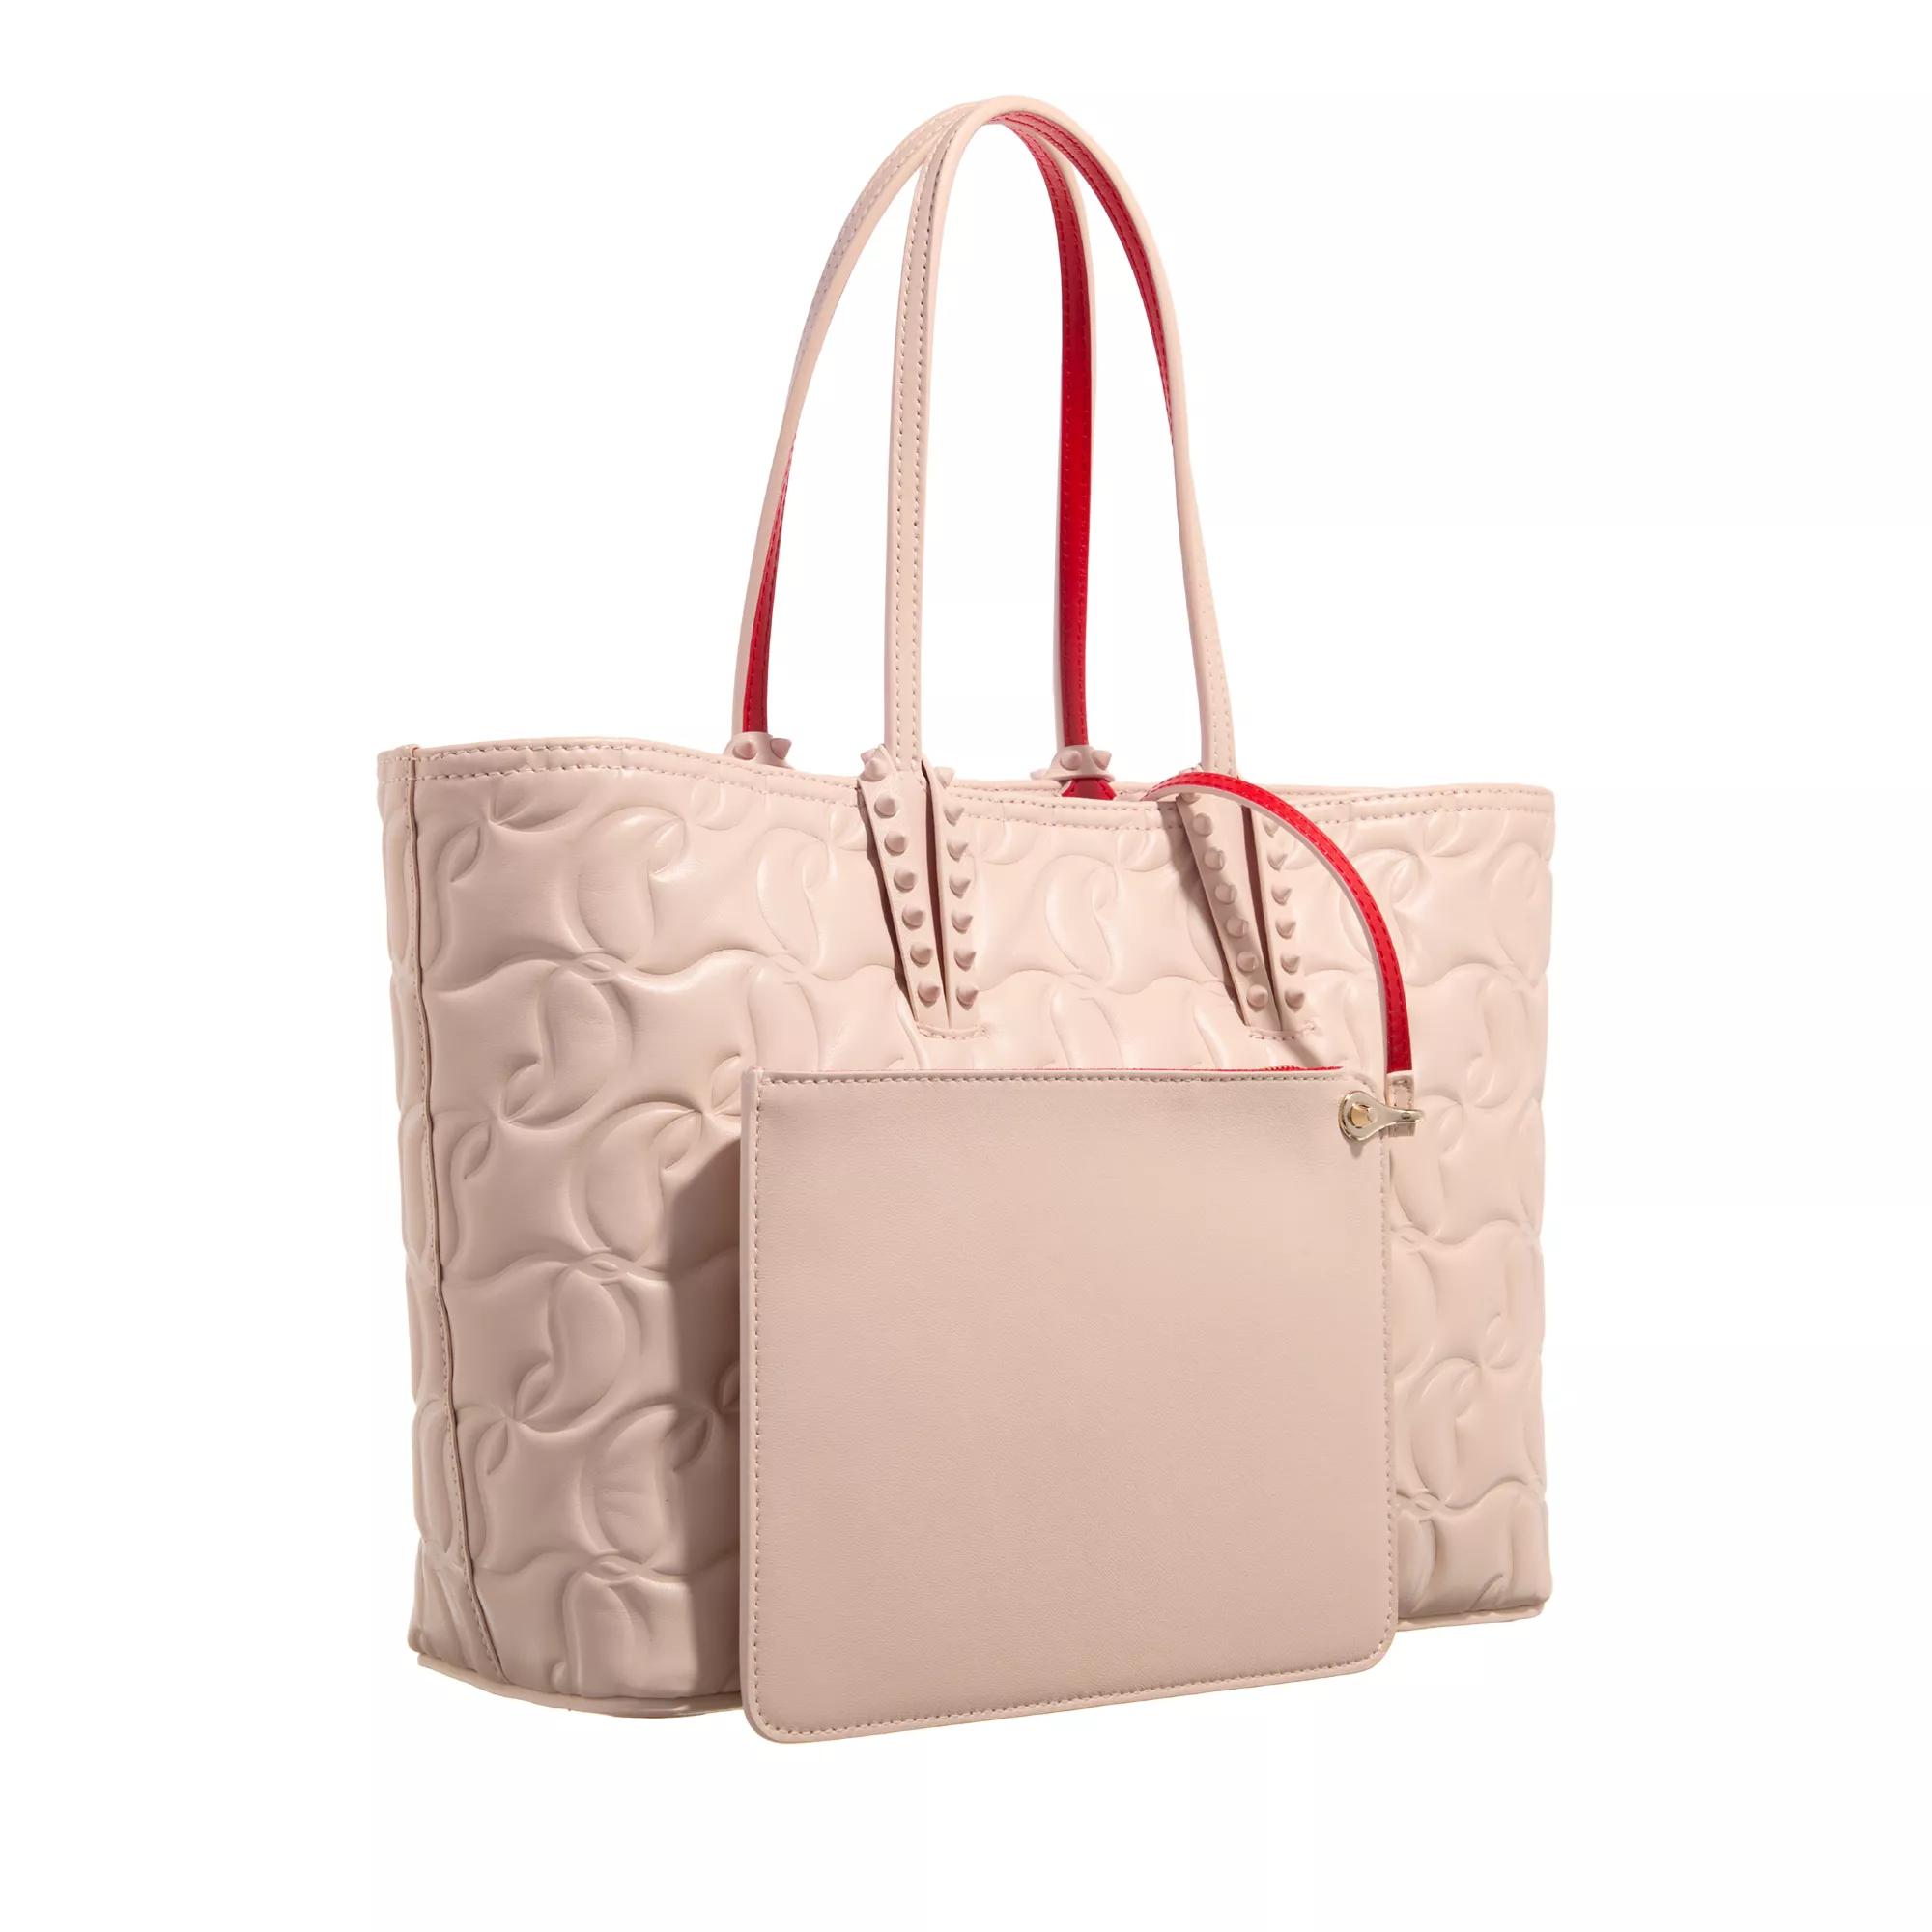 Christian Louboutin Shoppers Cabata Tote in poeder roze